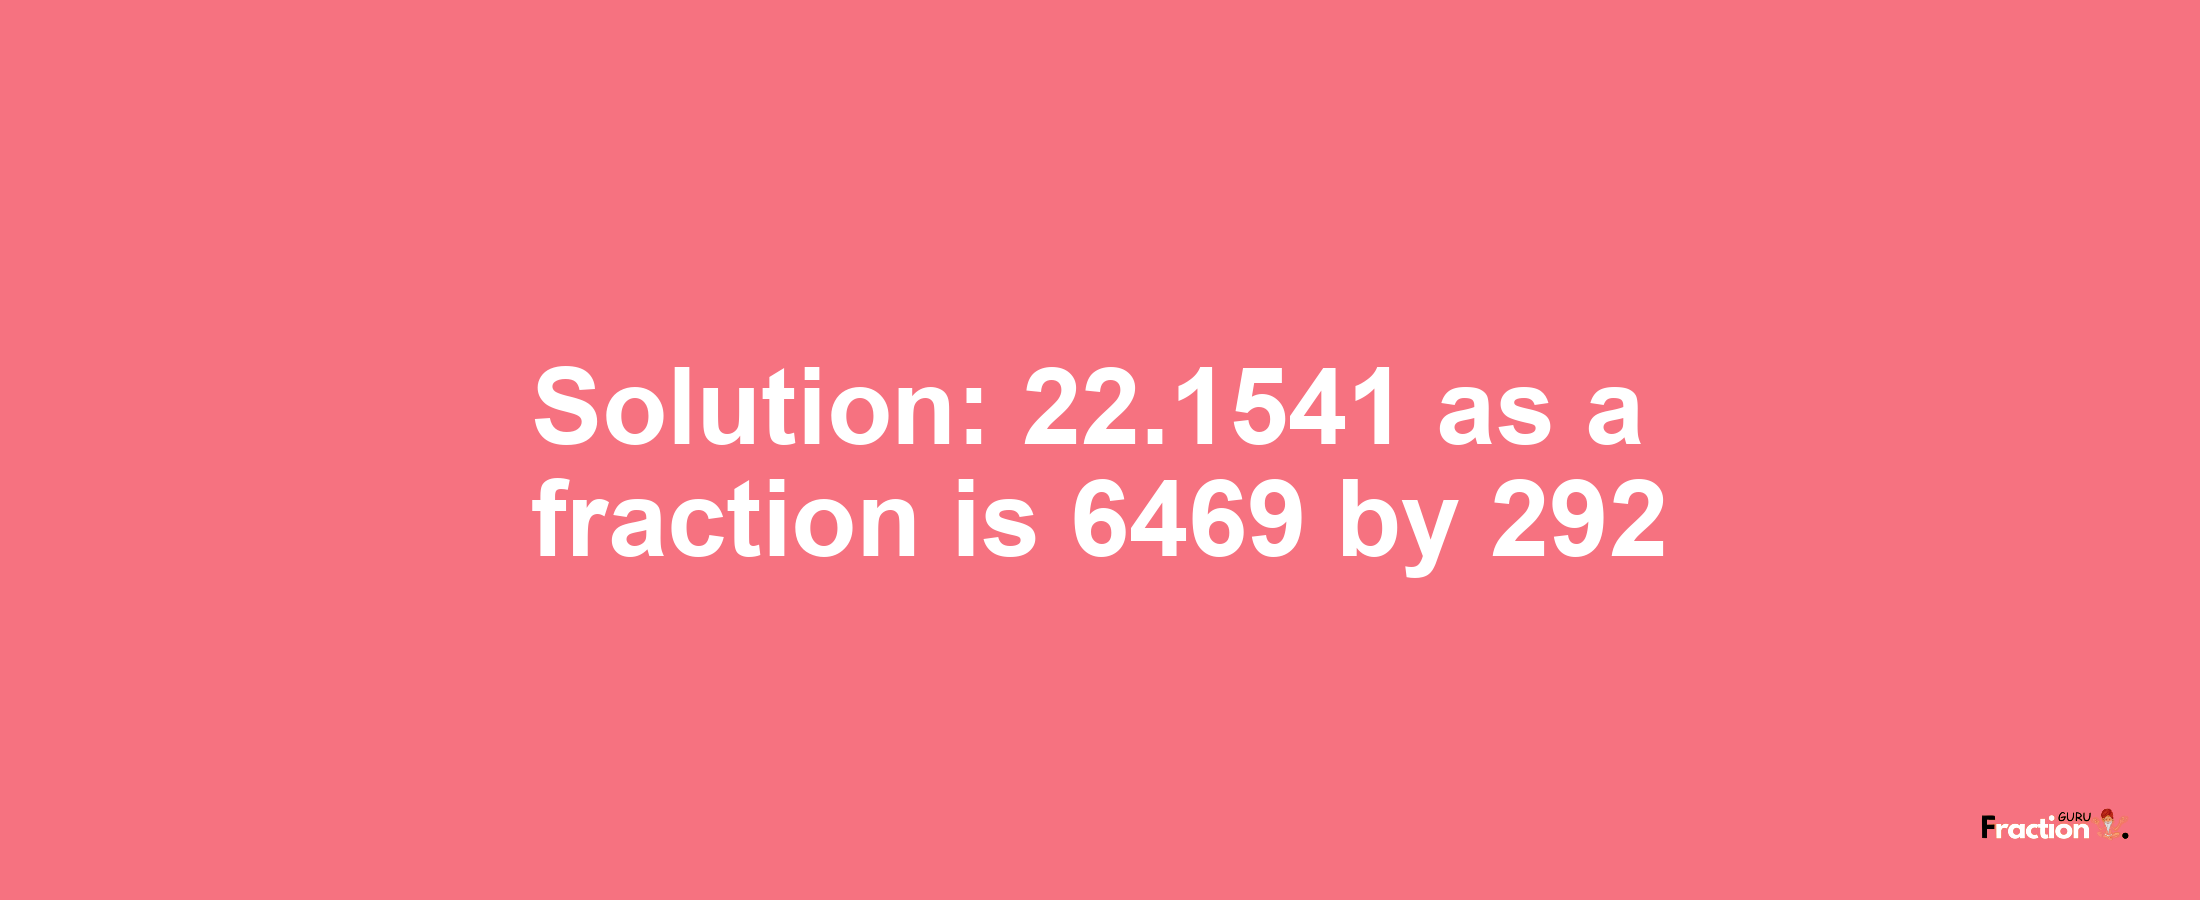 Solution:22.1541 as a fraction is 6469/292